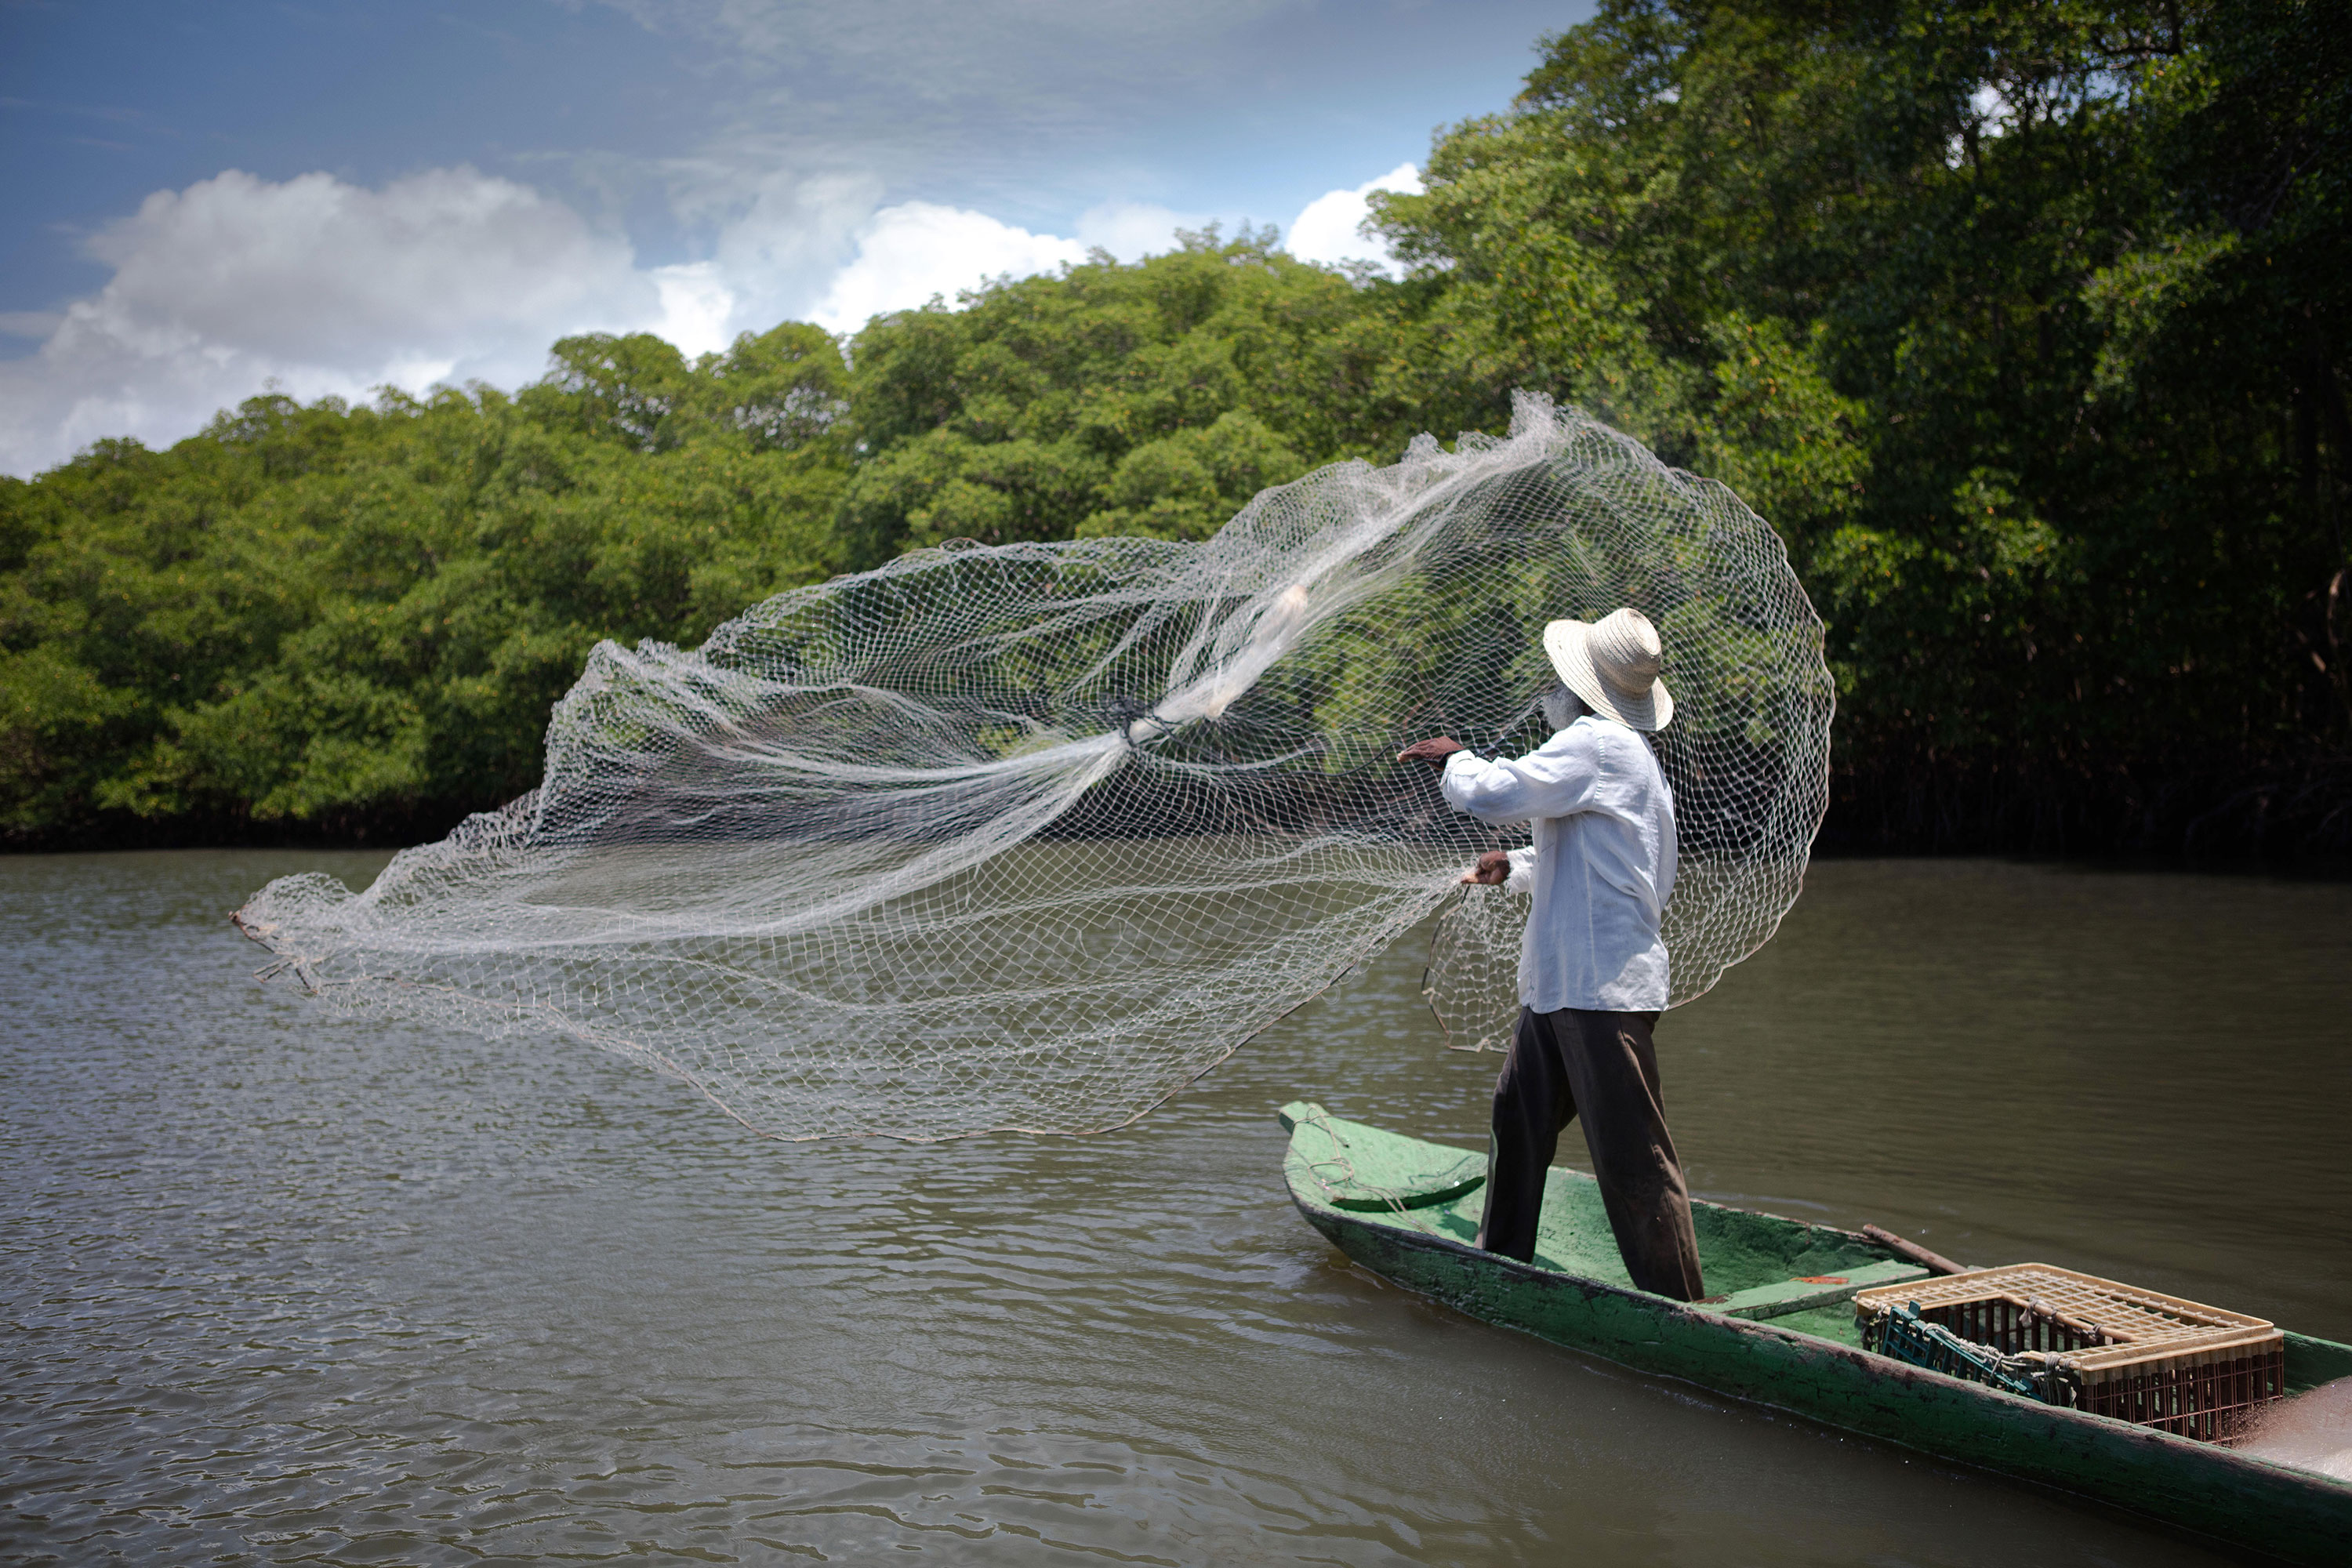 Man wearing a white hat and dark pants standing in a boat in the water and throwing a fishing net in the air, green trees in the background